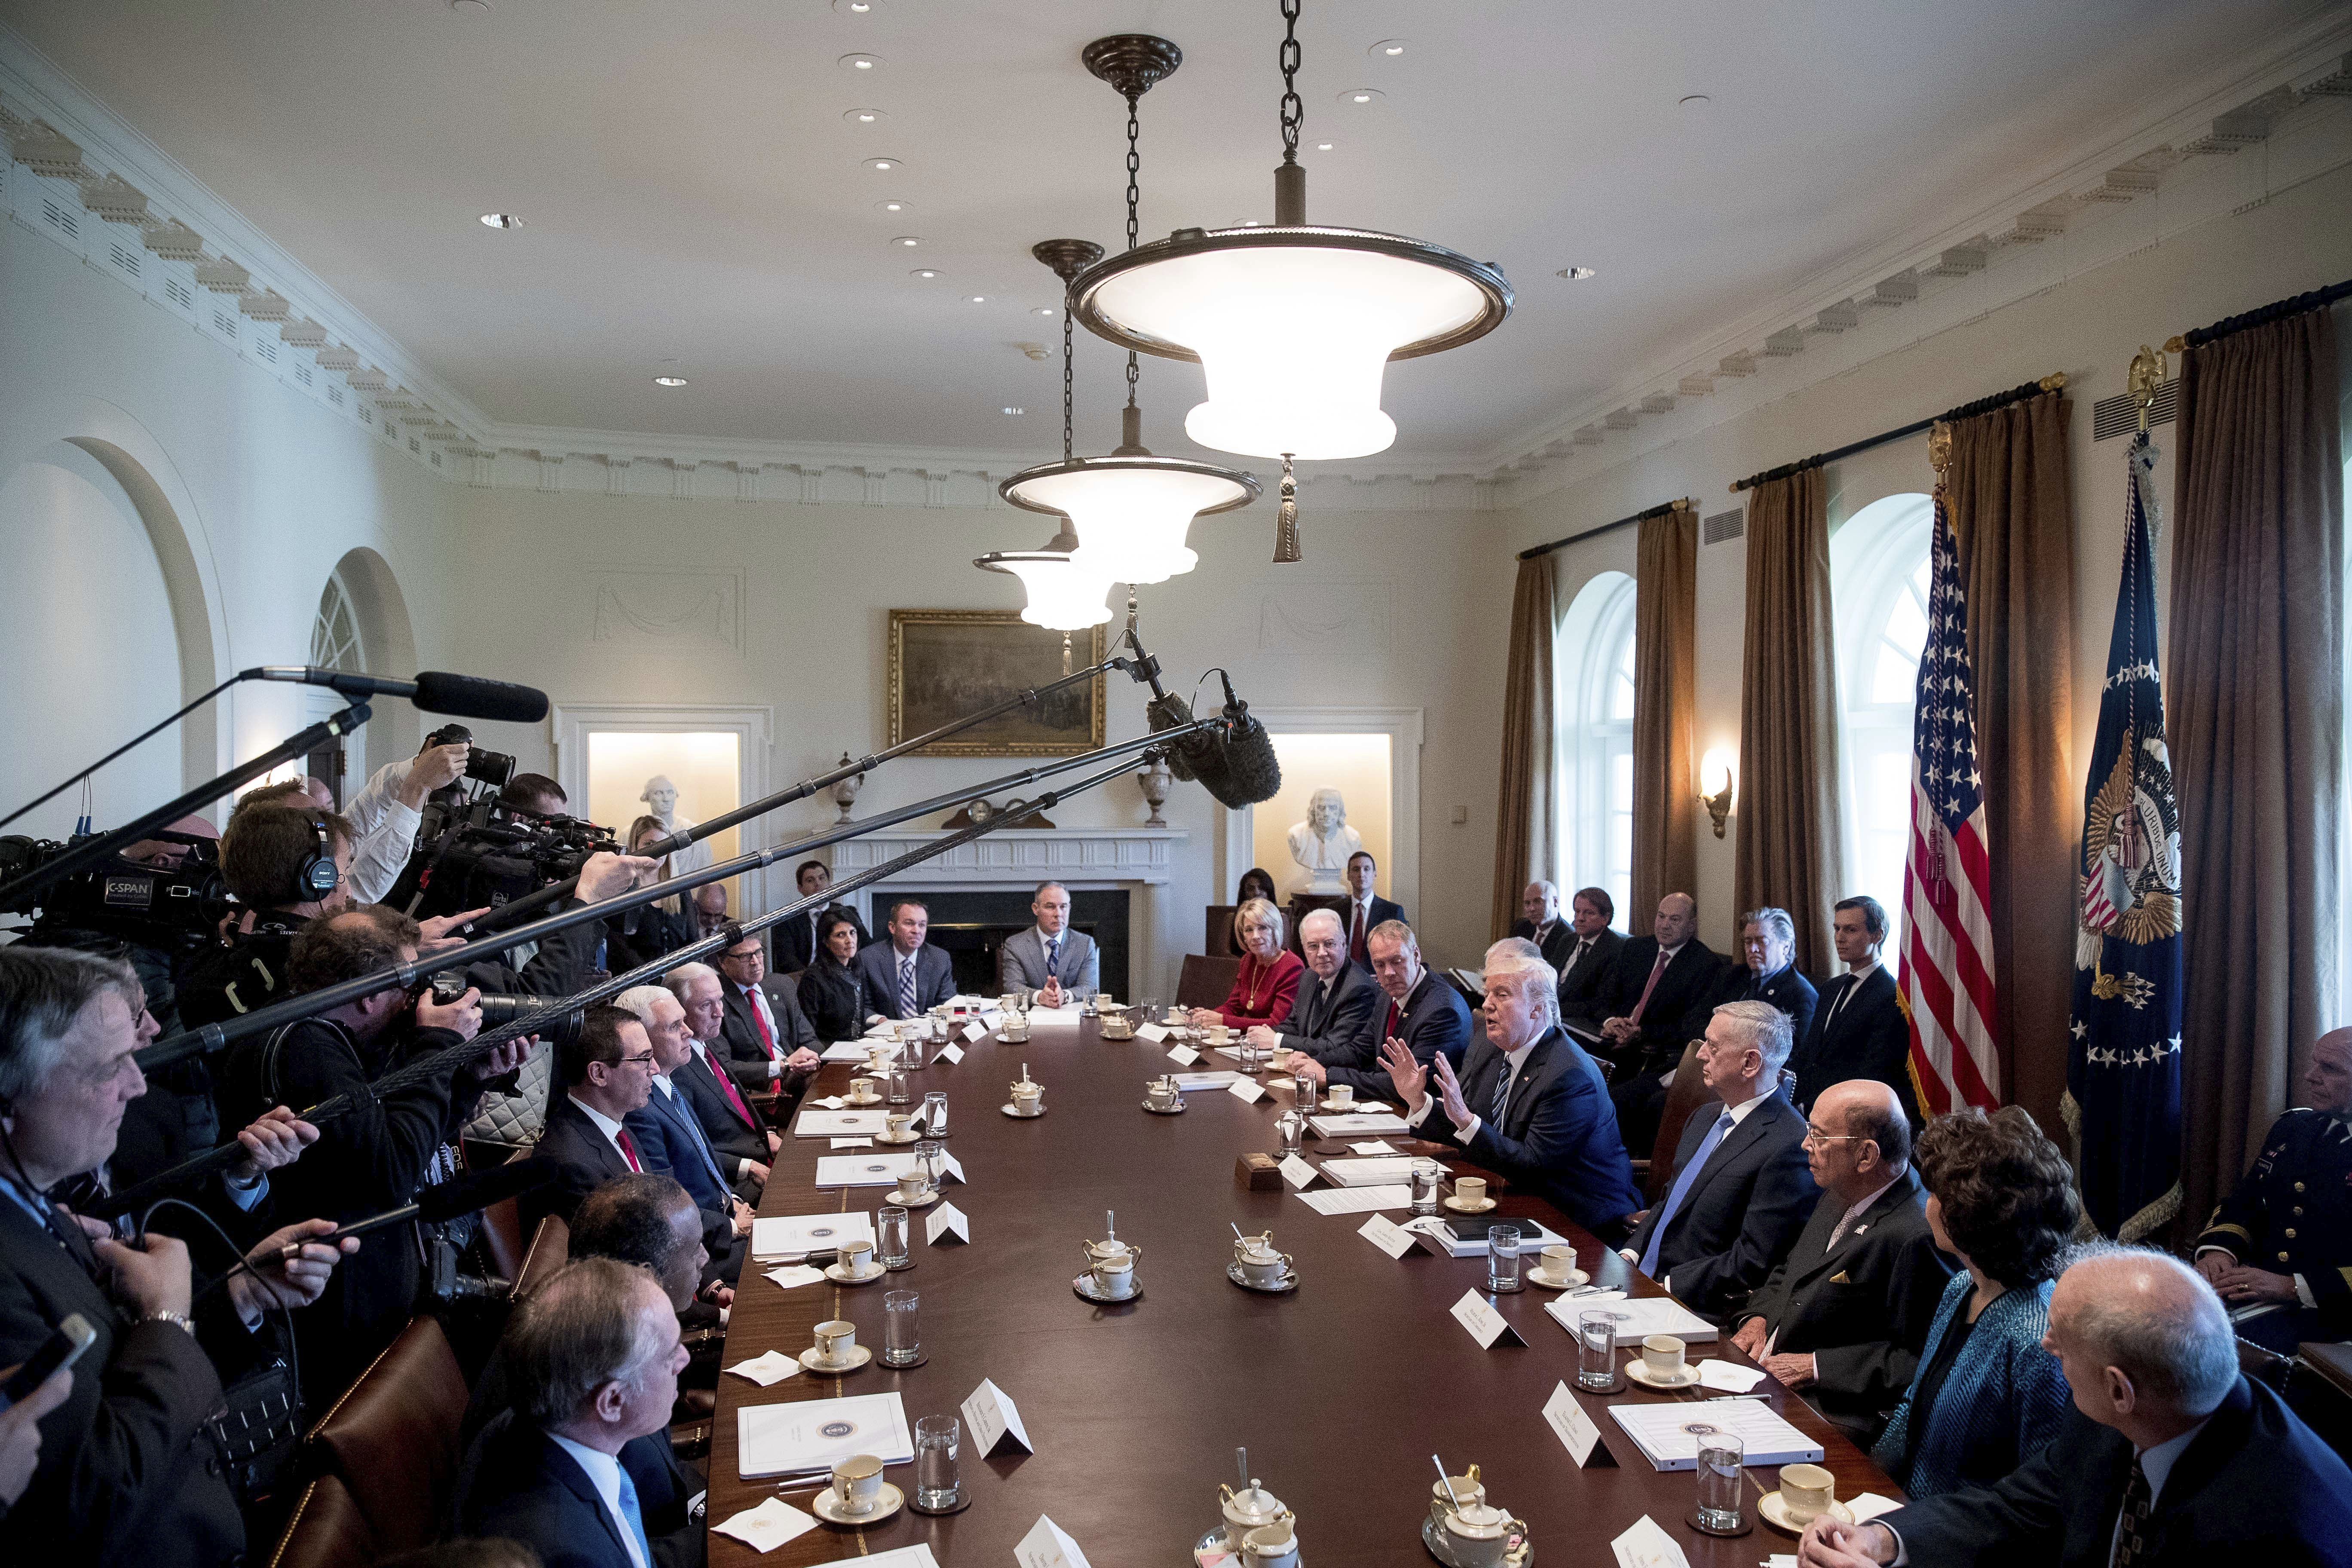 foto : andrew harnik : president donald trump speaks during a meeting with his cabinet in the cabinet room of the white house in washington, monday, march 13, 2017. clockwise, from lower left are, veterans affairs secretary david shulkin, housing and urban development secretary ben carson, treasury secretary steve mnuchin, vice president mike pence, attorney general jeff sessions, energy secretary rick perry, un ambassador nikki haley, budget director mick mulvaney, epa administrator scott pruitt, education secretary betsy devos, health and human services secretary tom price, interior secretary ryan zinke, secretary of state rex tillerson, the president, defense secretary jim mattis, commerce secretary wilbur ross, transportation secretary elaine chao and homeland security secretary john kelly. (ap photo/andrew harnik)